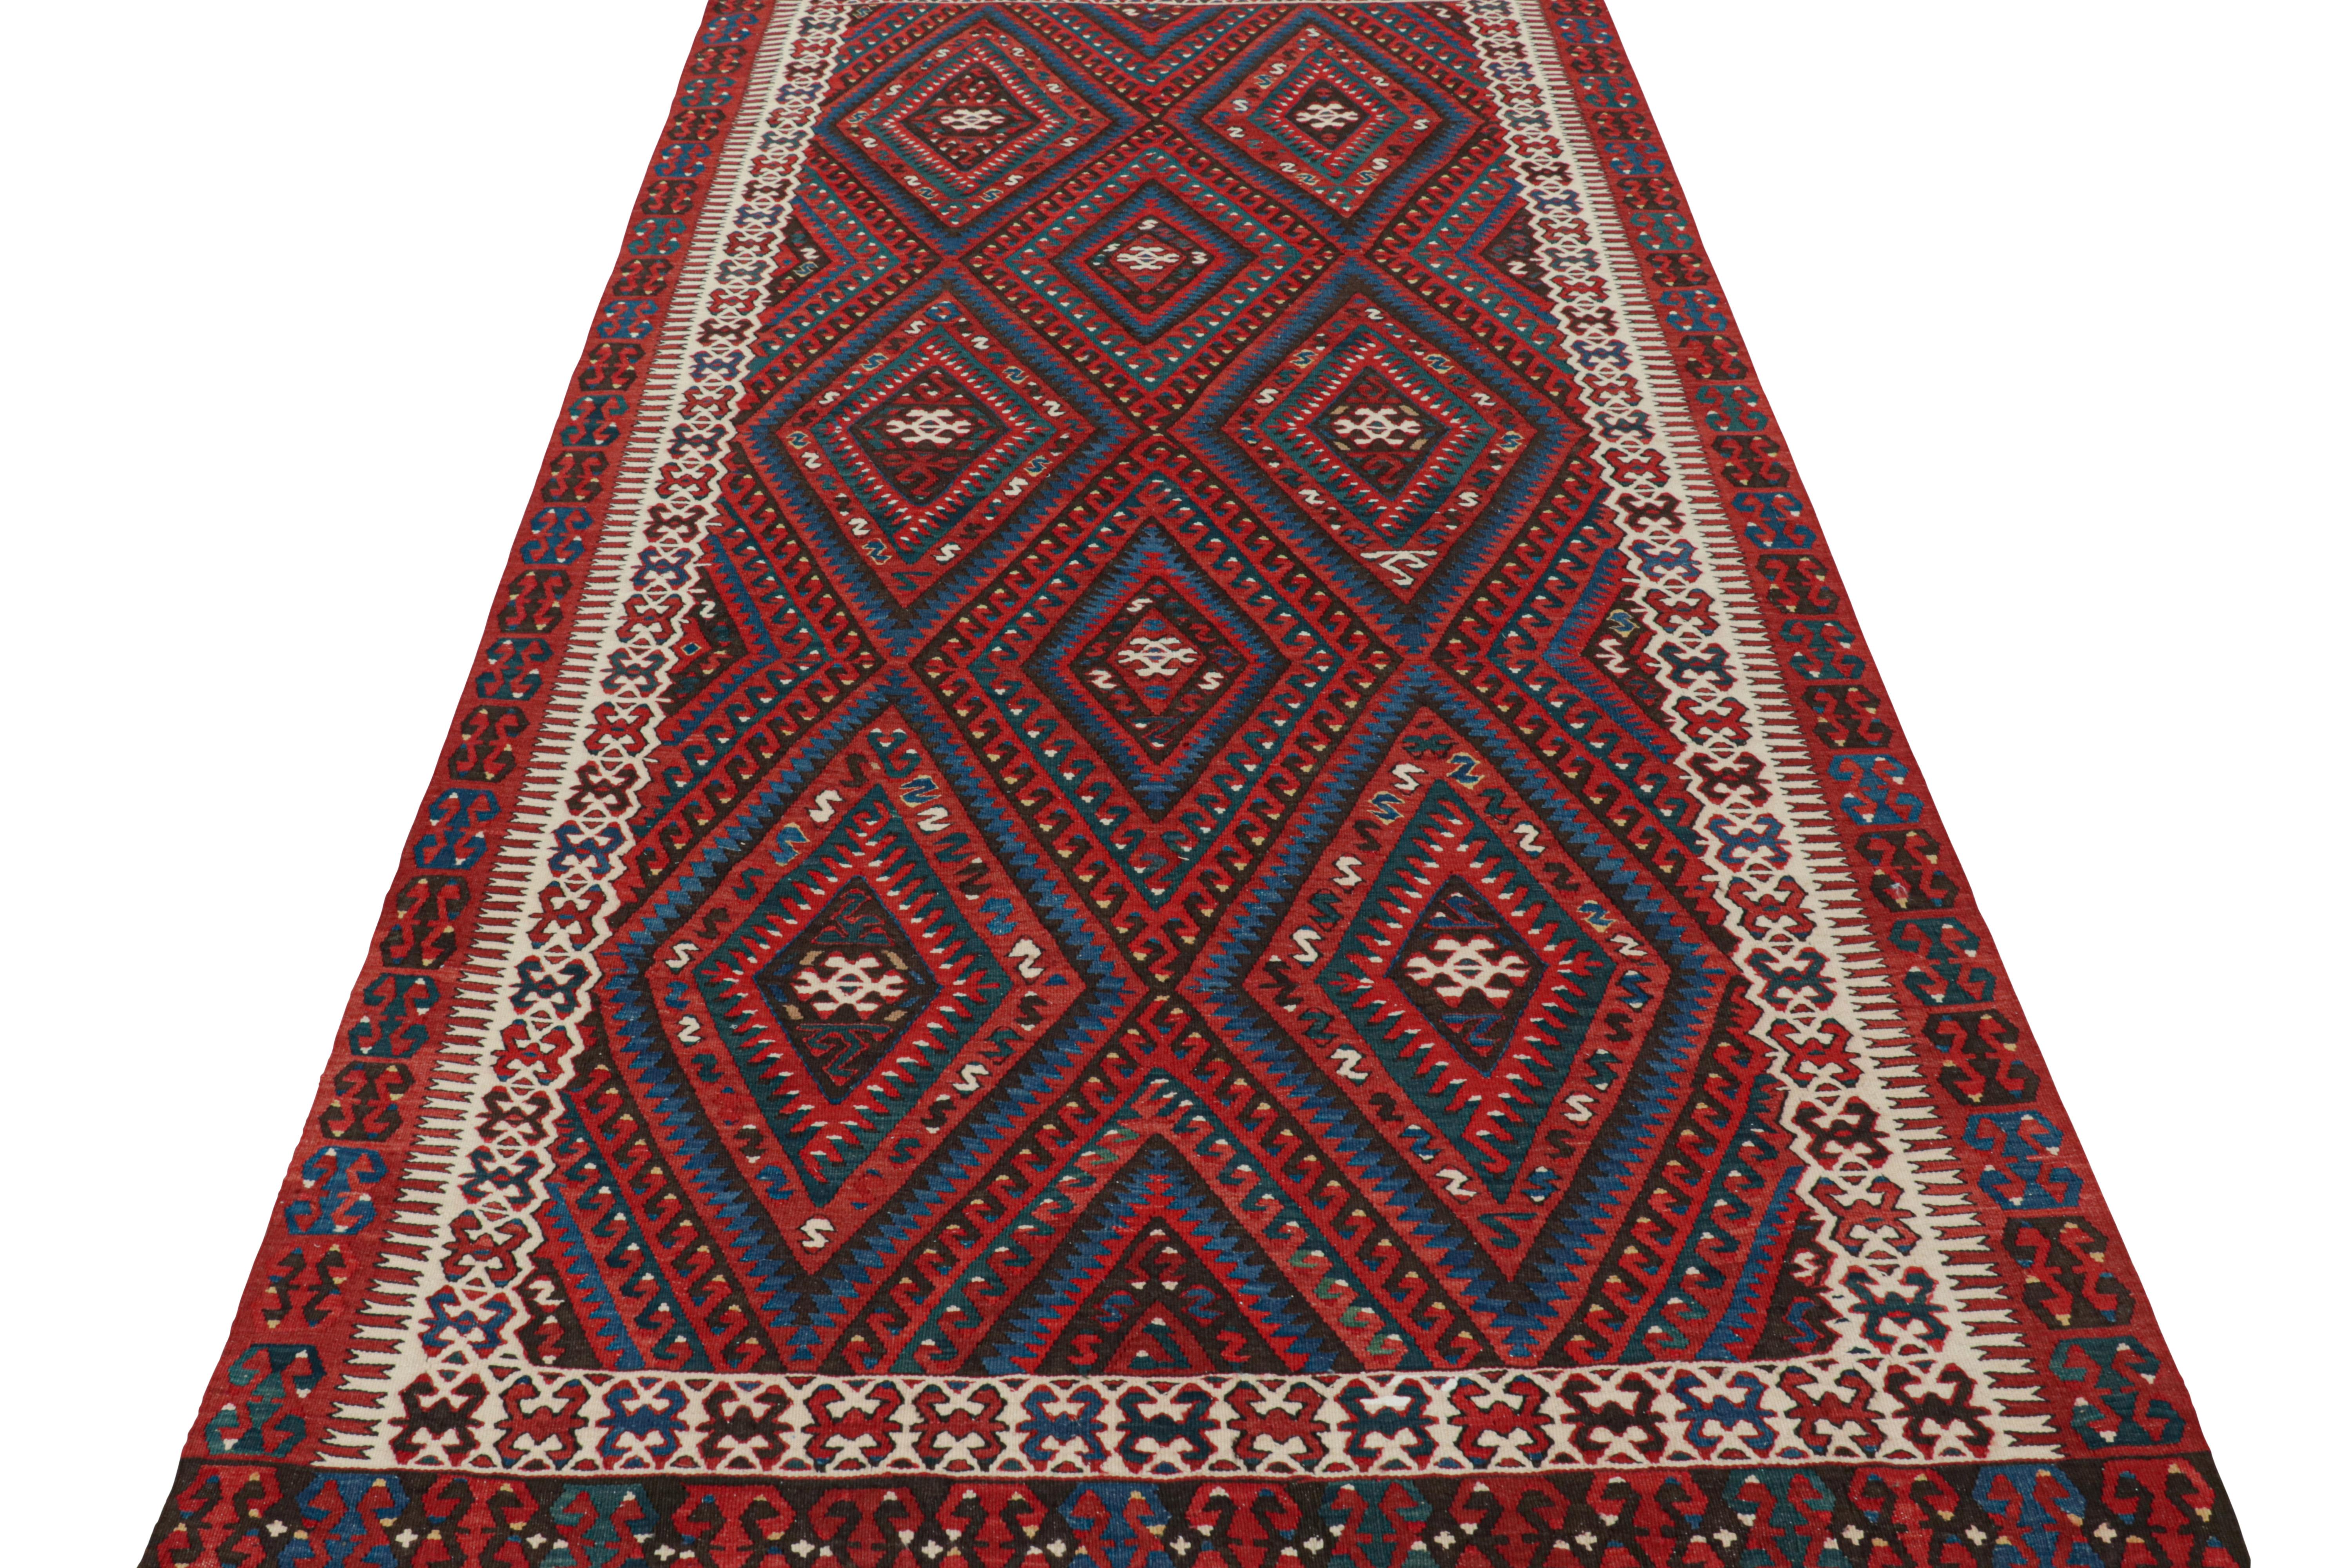 Vintage Midcentury Fethiye Diamond Tribal Red Blue Wool Kilim Rug by Rug & Kilim In Good Condition For Sale In Long Island City, NY